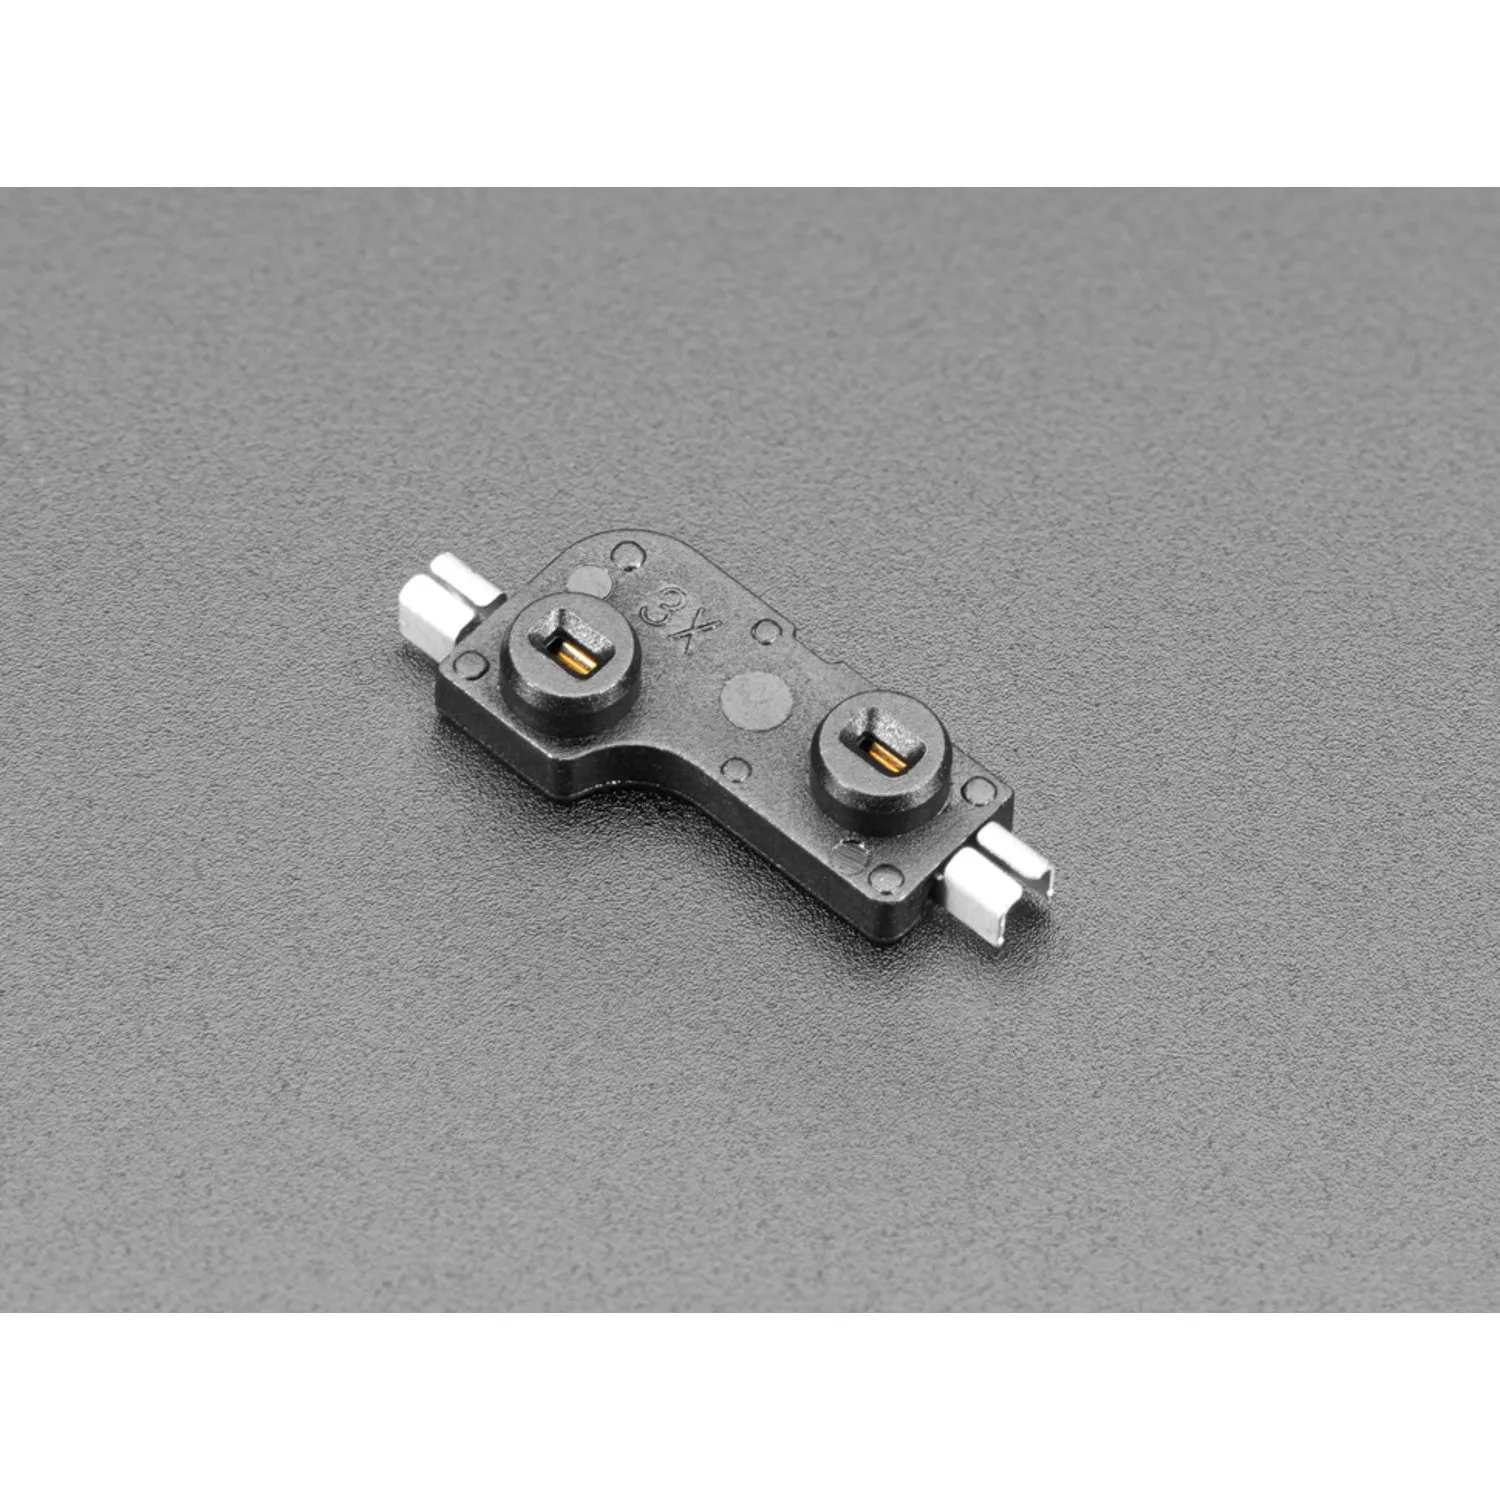 Photo of Kailh Switch Sockets for MX-compatible Mechanical Keys - 20 Pack